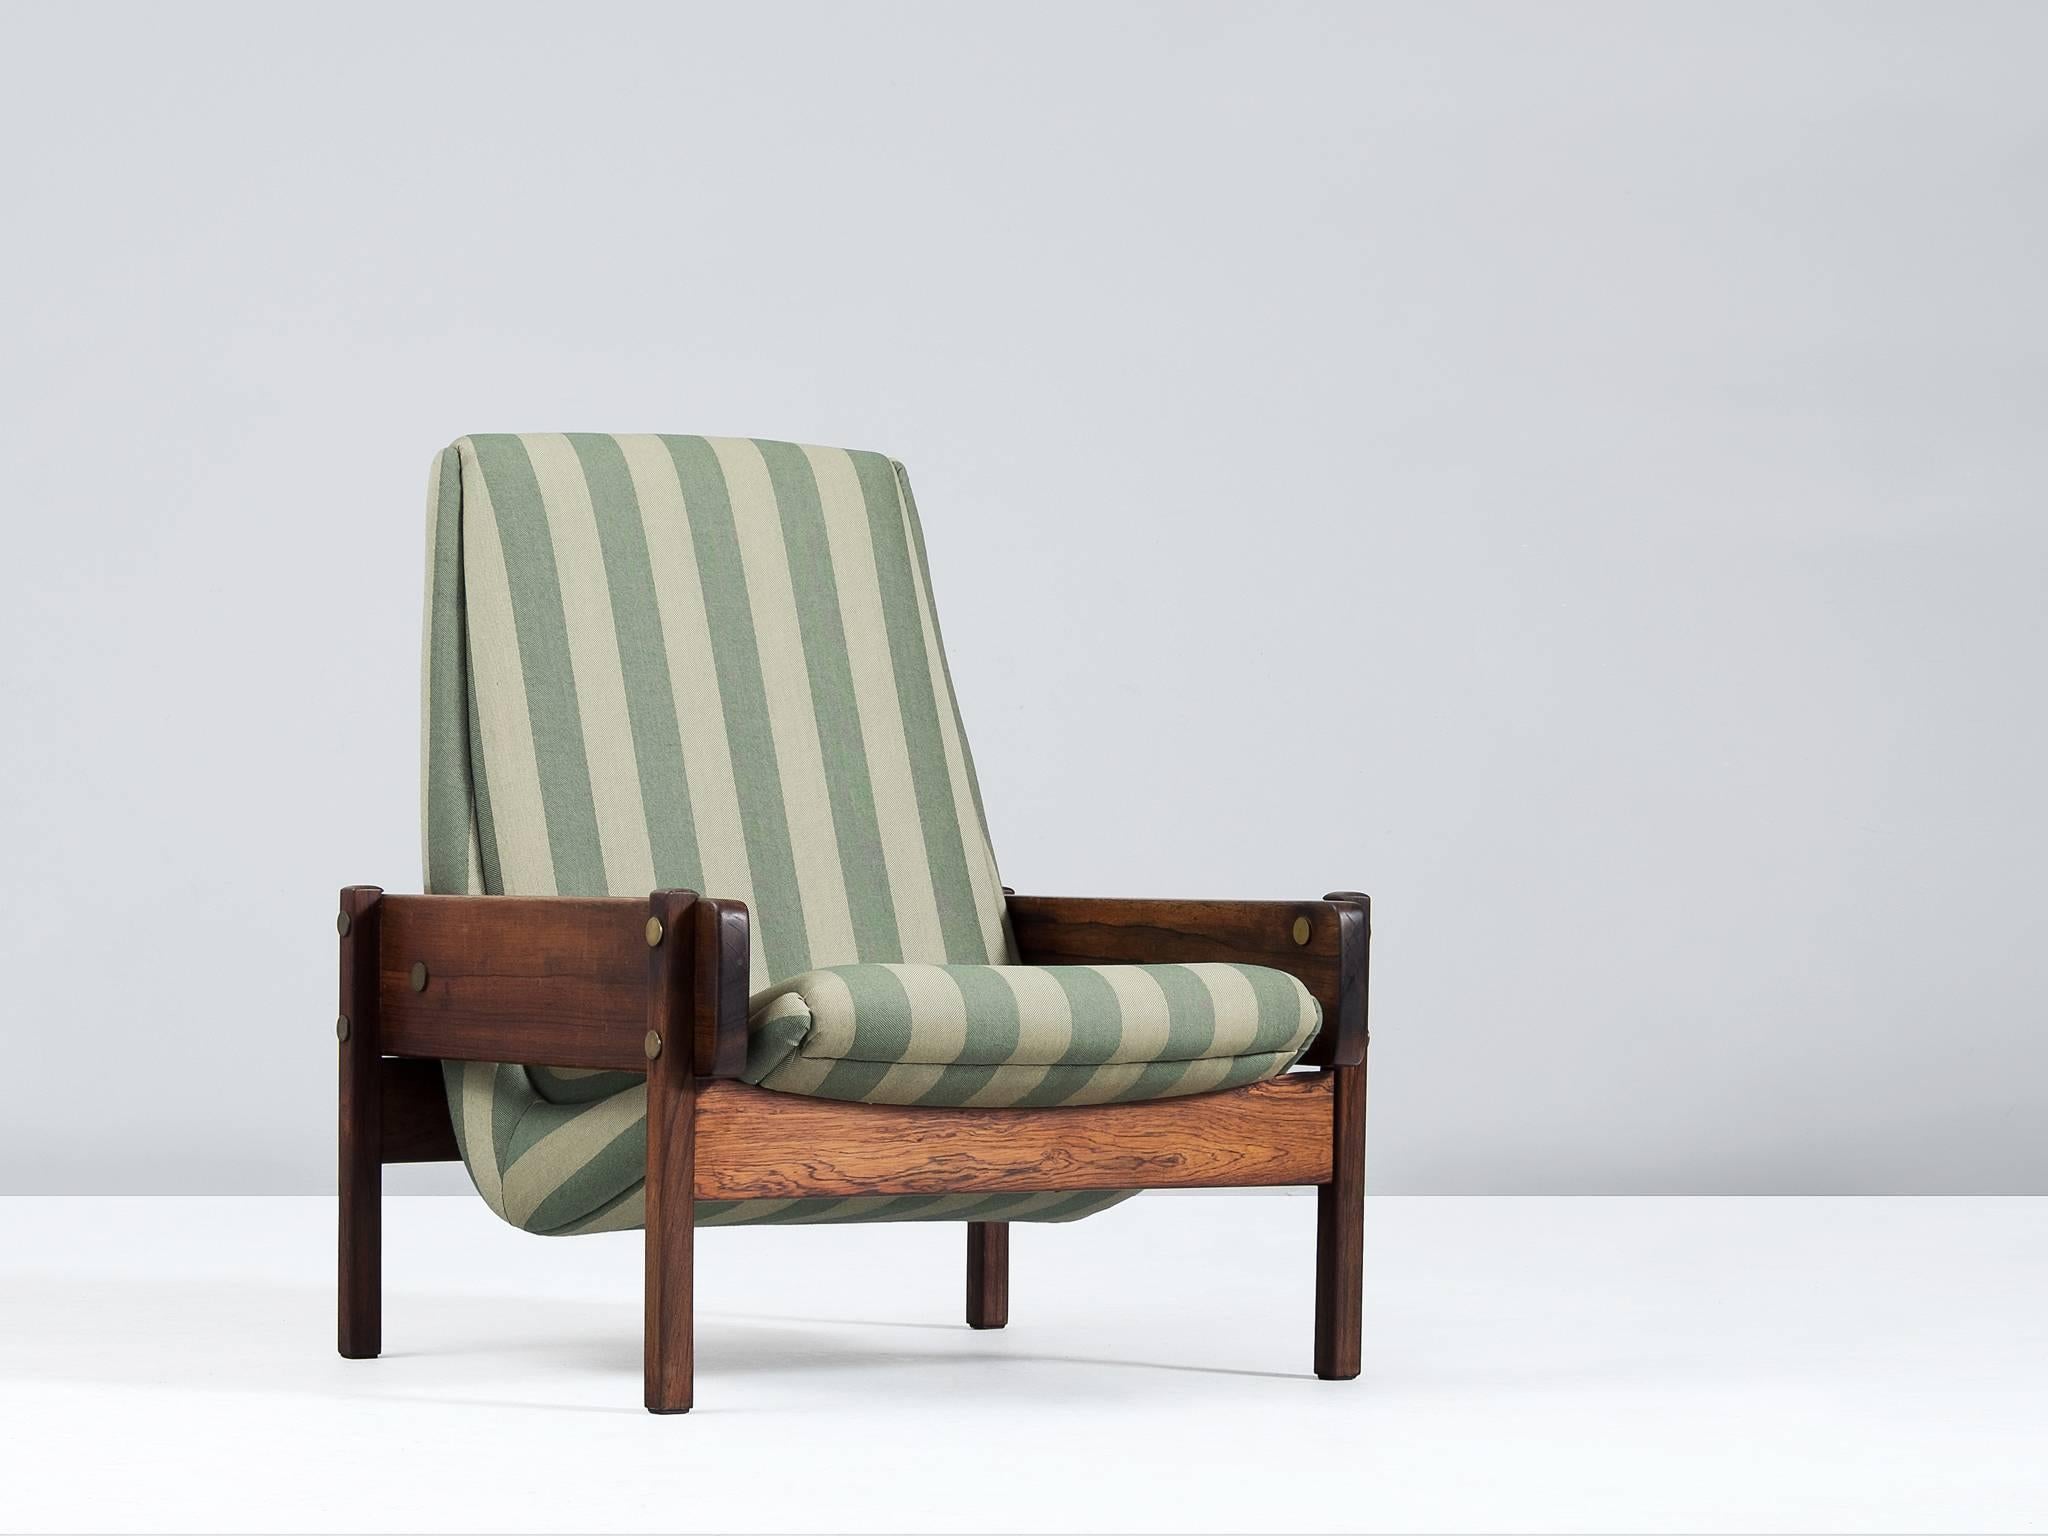 Sergio Rodriguez for OCA Brazil, lounge chair 'Vronka,' in rosewood, brass and fabric, by  1962. 

Wonderful example of the 'Vronka' chair by Sergio Rodrigues. The solid rosewood frame forms an excellent combination with the brass connectors. The